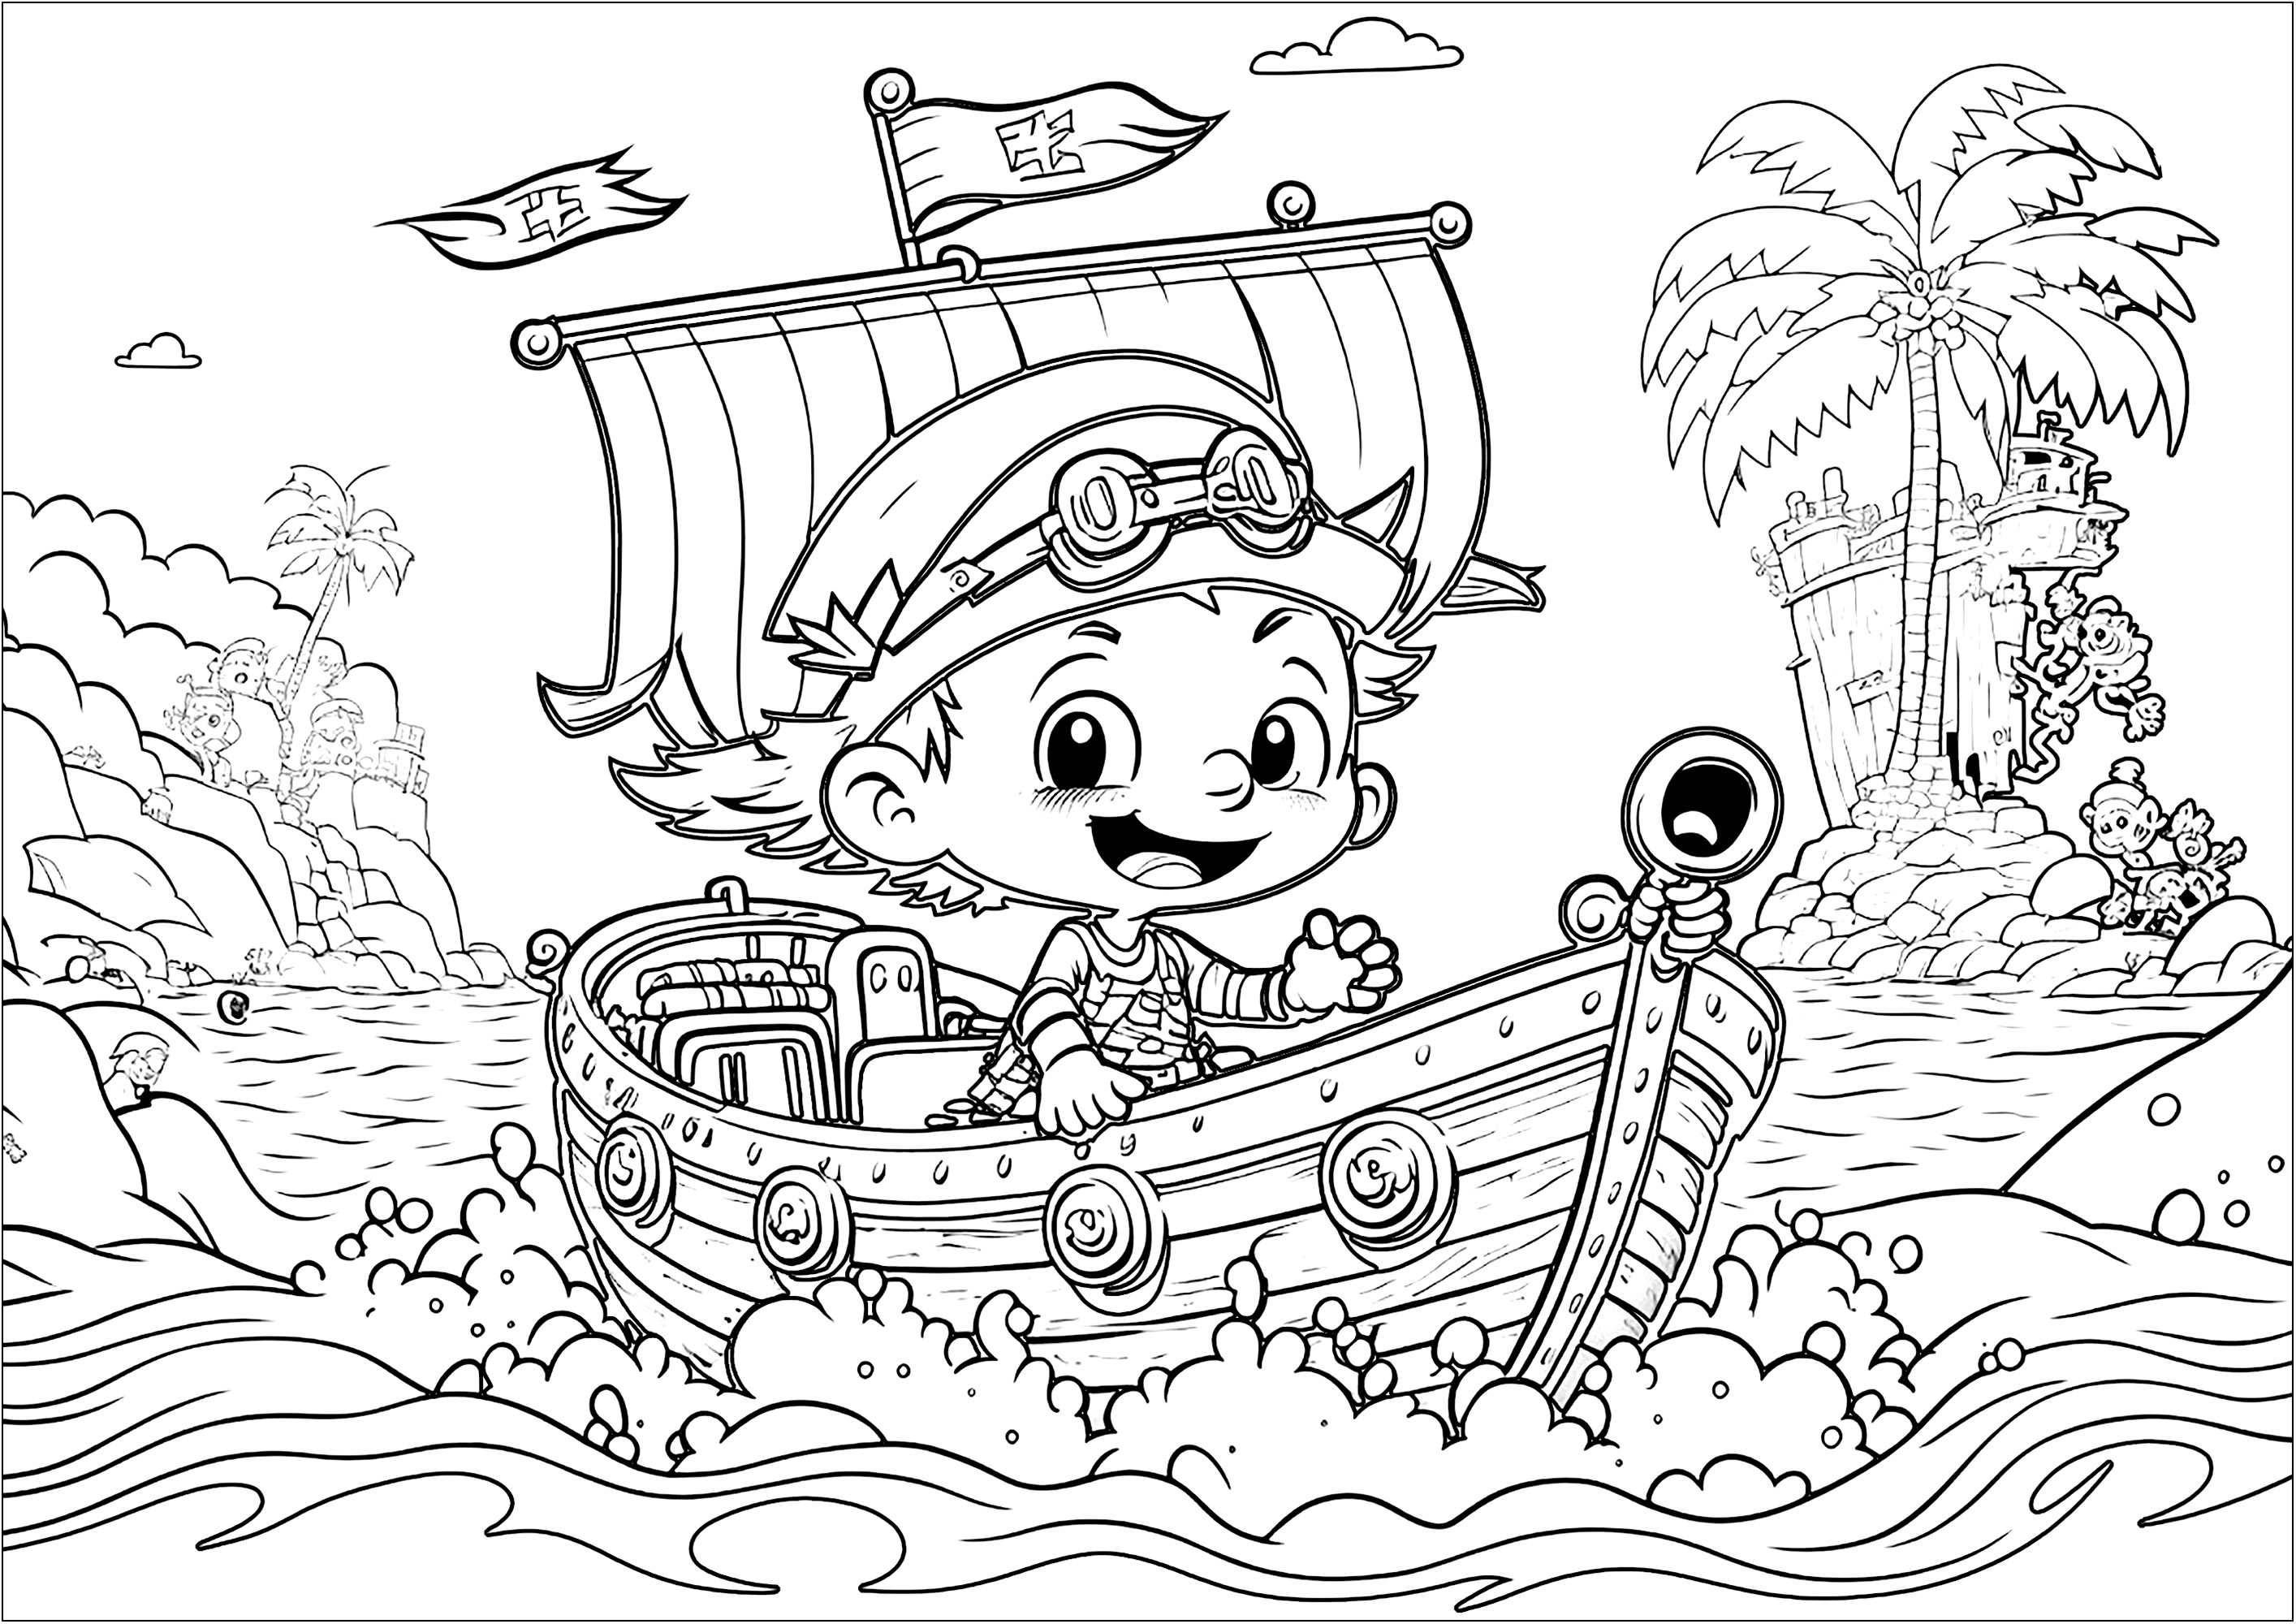 A nice pirate to color, on his way to new adventures aboard his beautiful ship. The style of this coloring page is close to Disney / Pixar characters.Children will be able to imagine pirate stories and adventures while coloring.